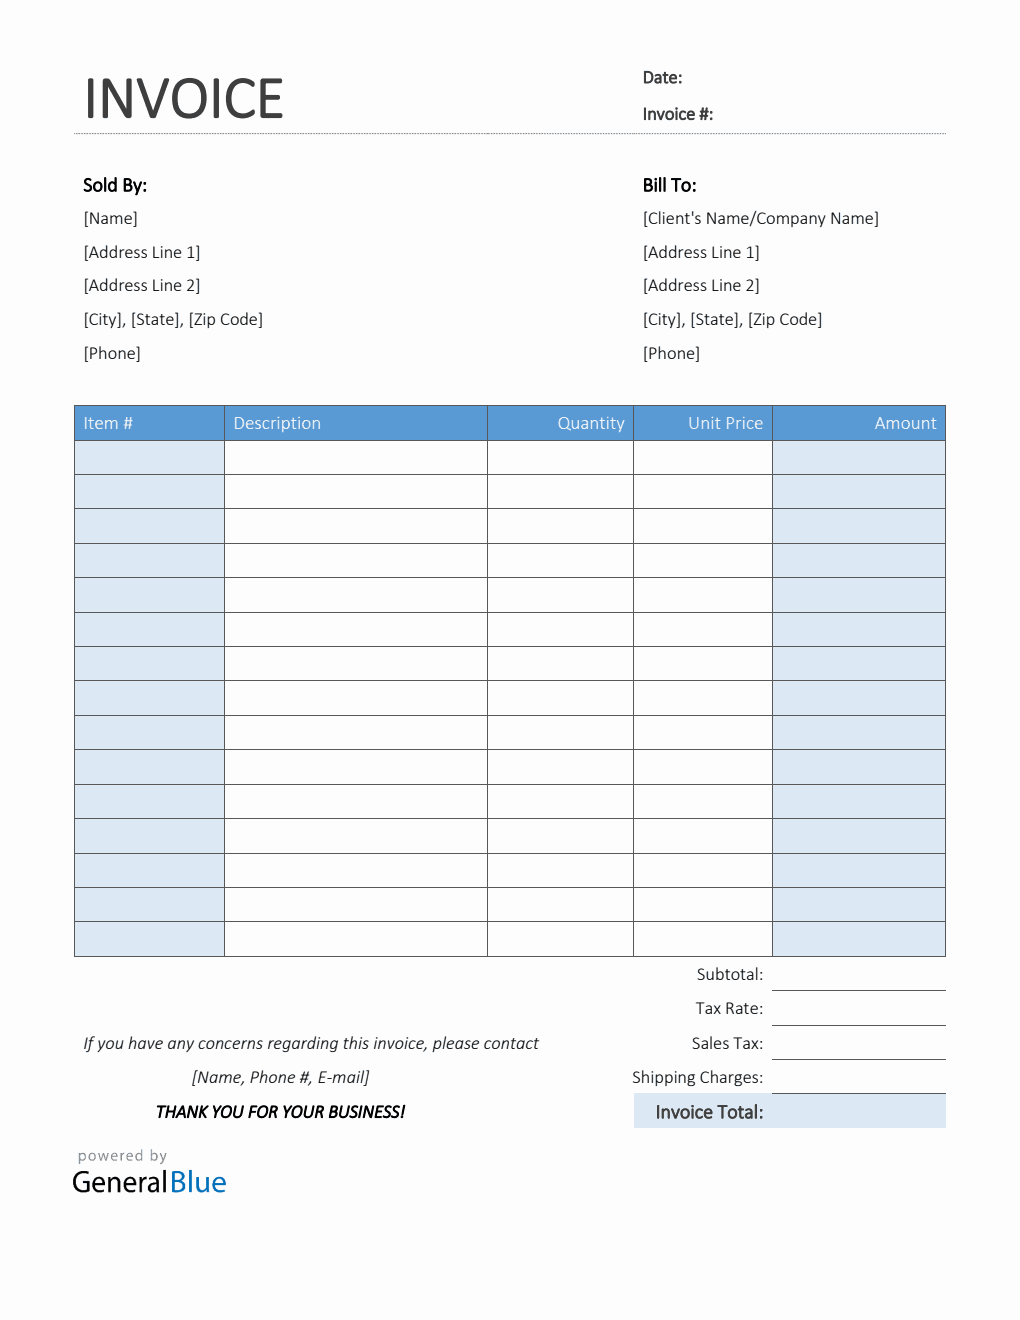 Printable Sales Invoice in Word (Colorful)